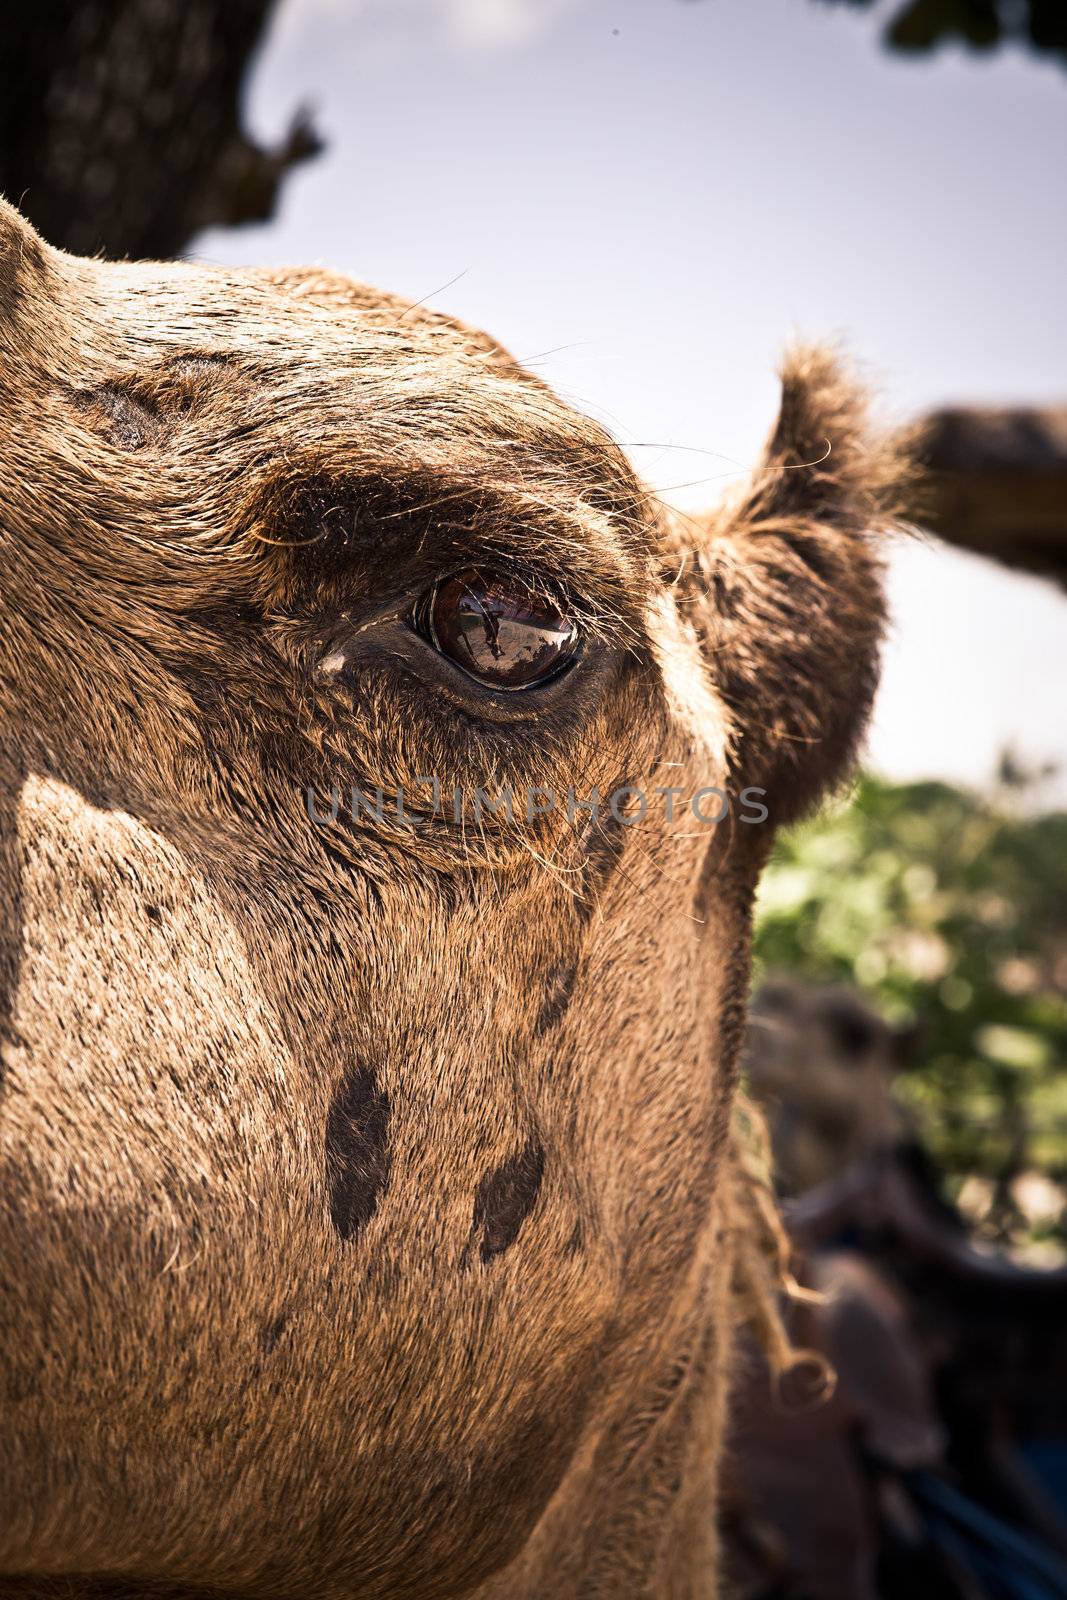 Eye of a camel by jrstock